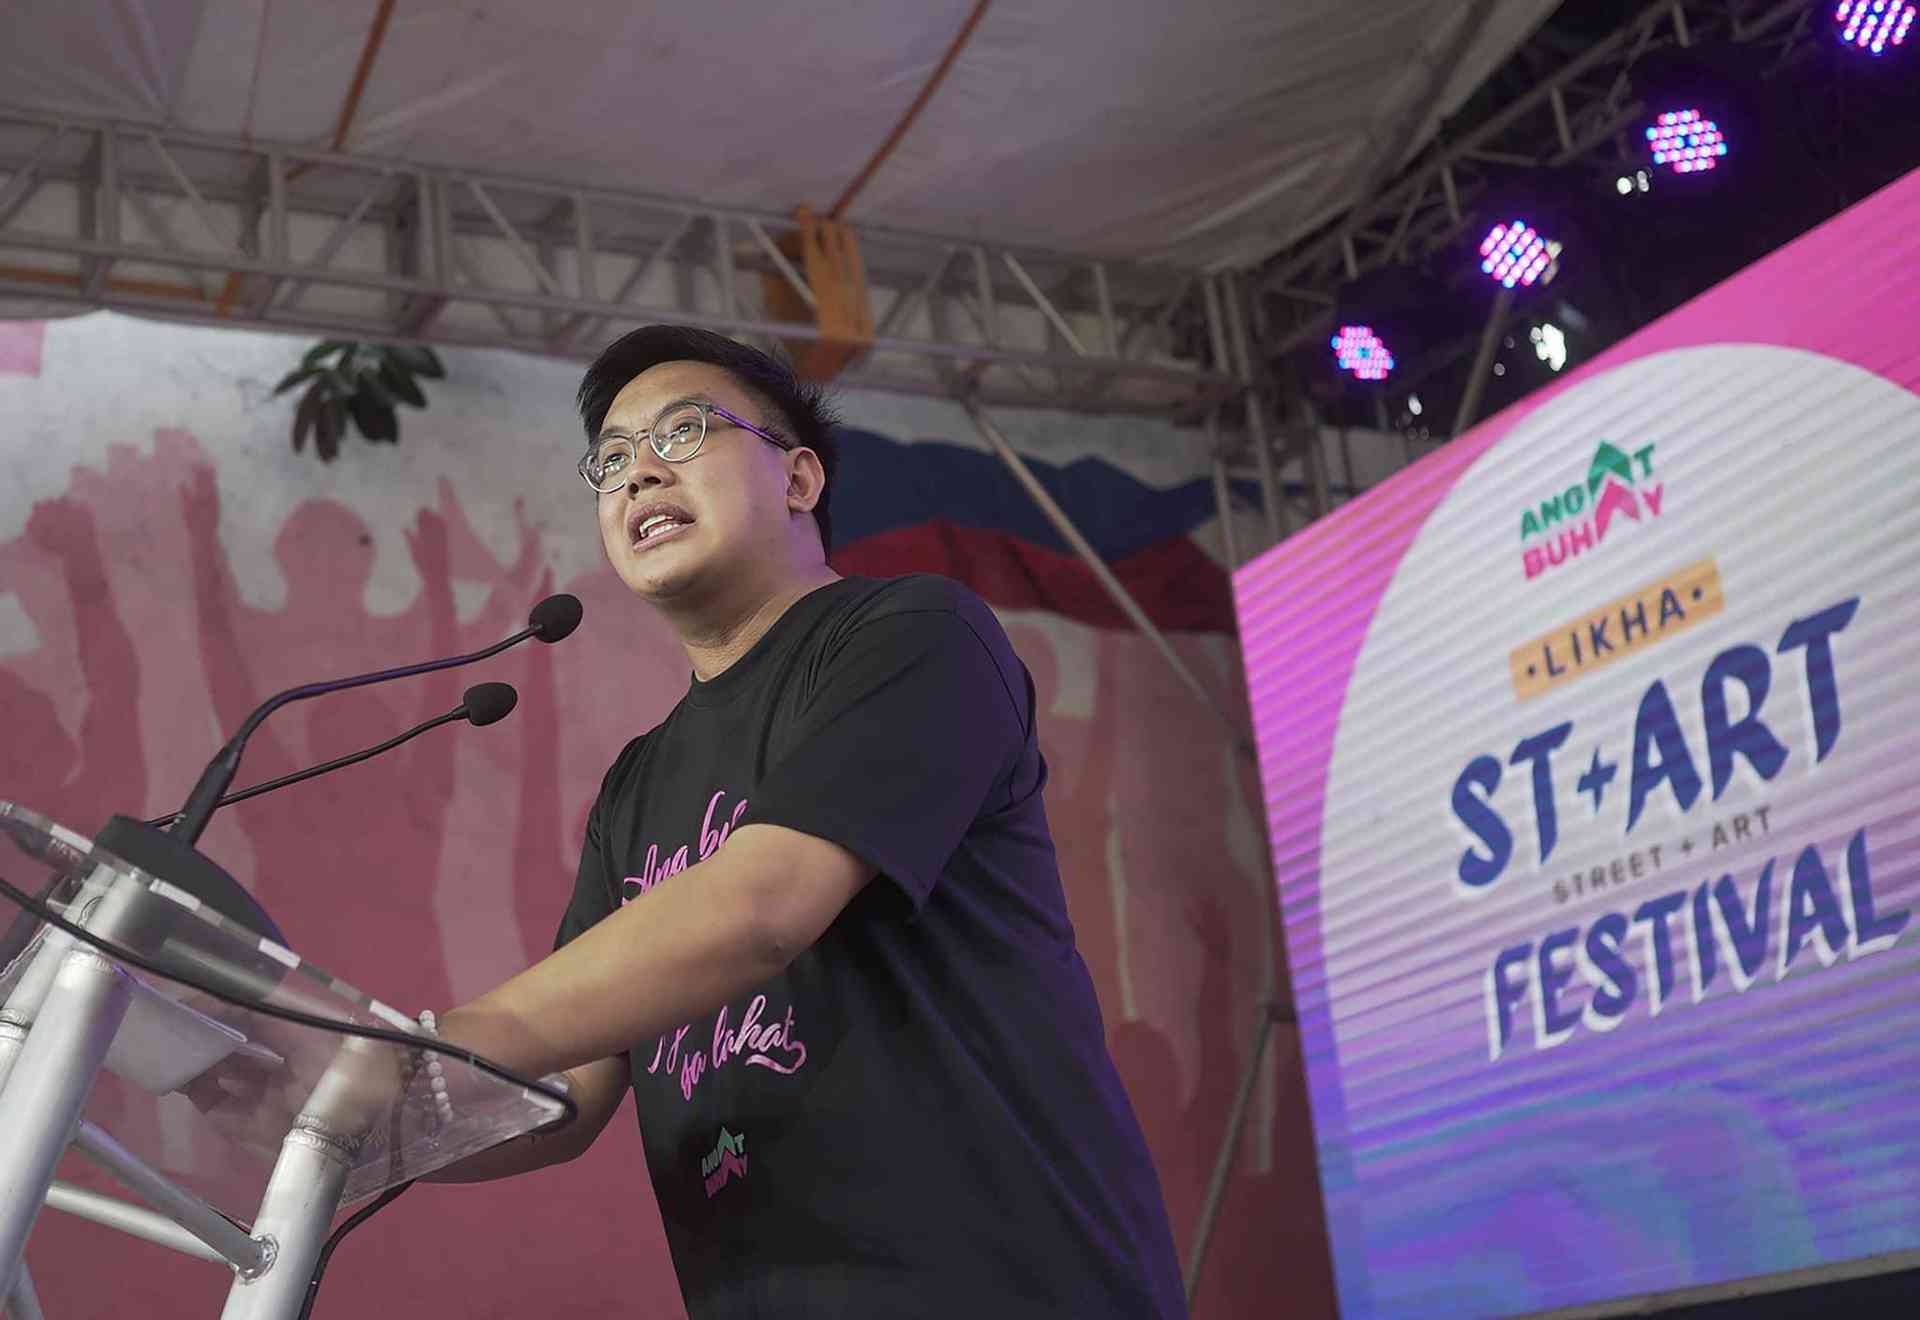 Angat Buhay slams Badoy for red-tagging: "Utterly baseless, encourages harassment"